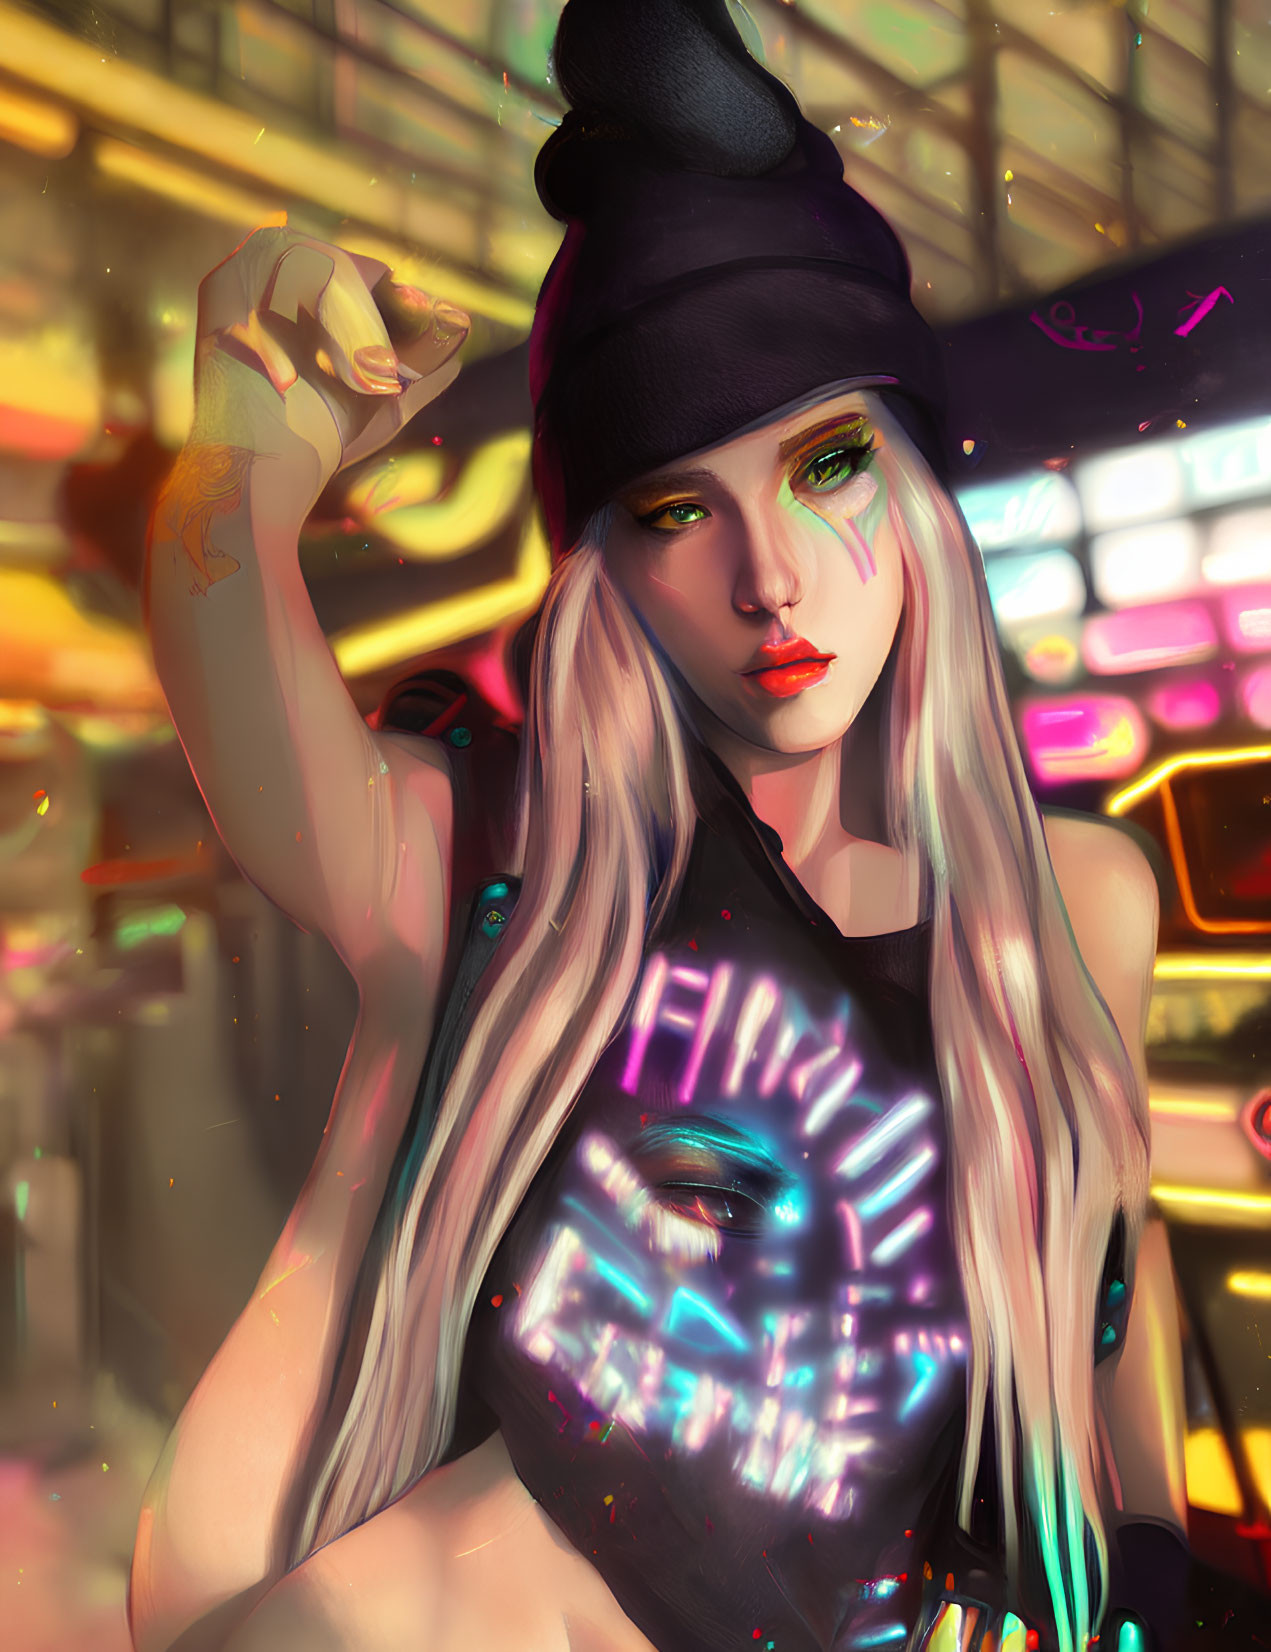 Blonde woman in beanie and neon top against arcade backdrop